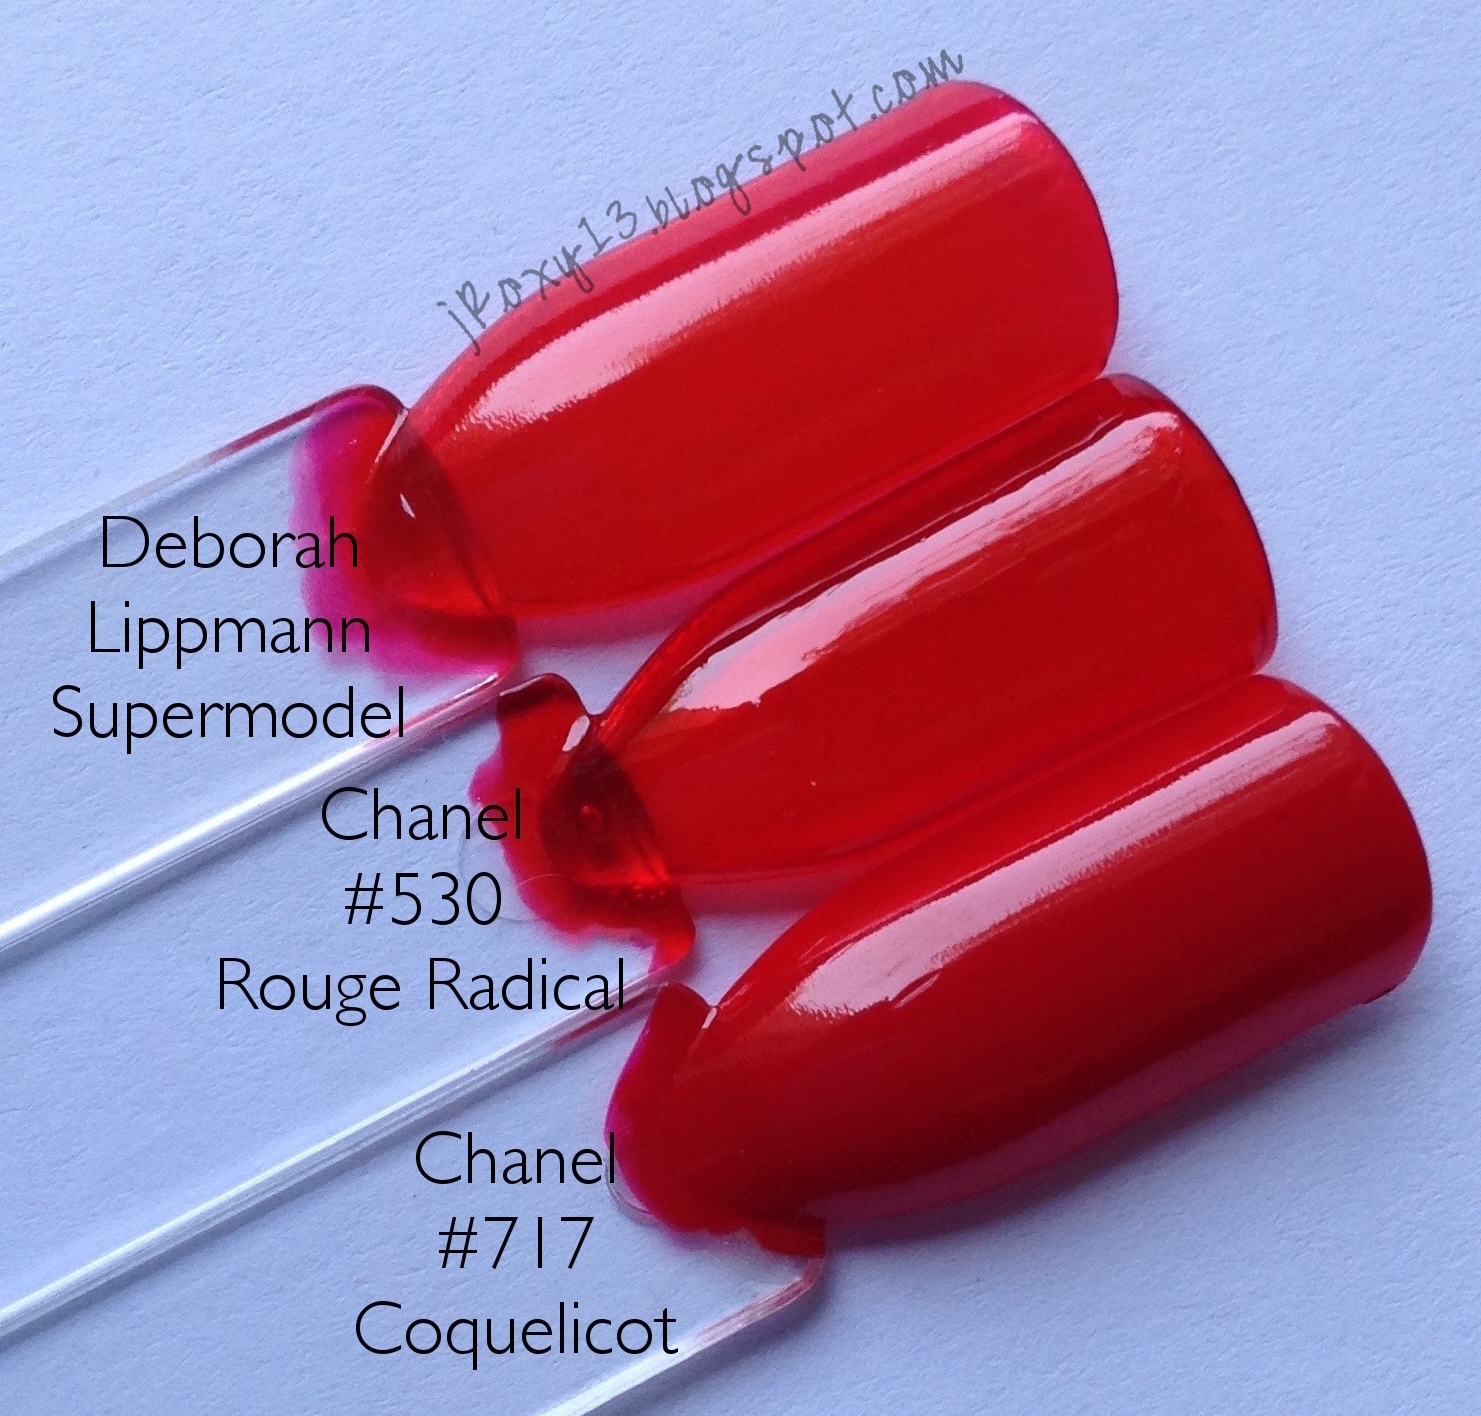 Red jellyiscousness – Chanel Le Vernis Pirate 08 nail polish